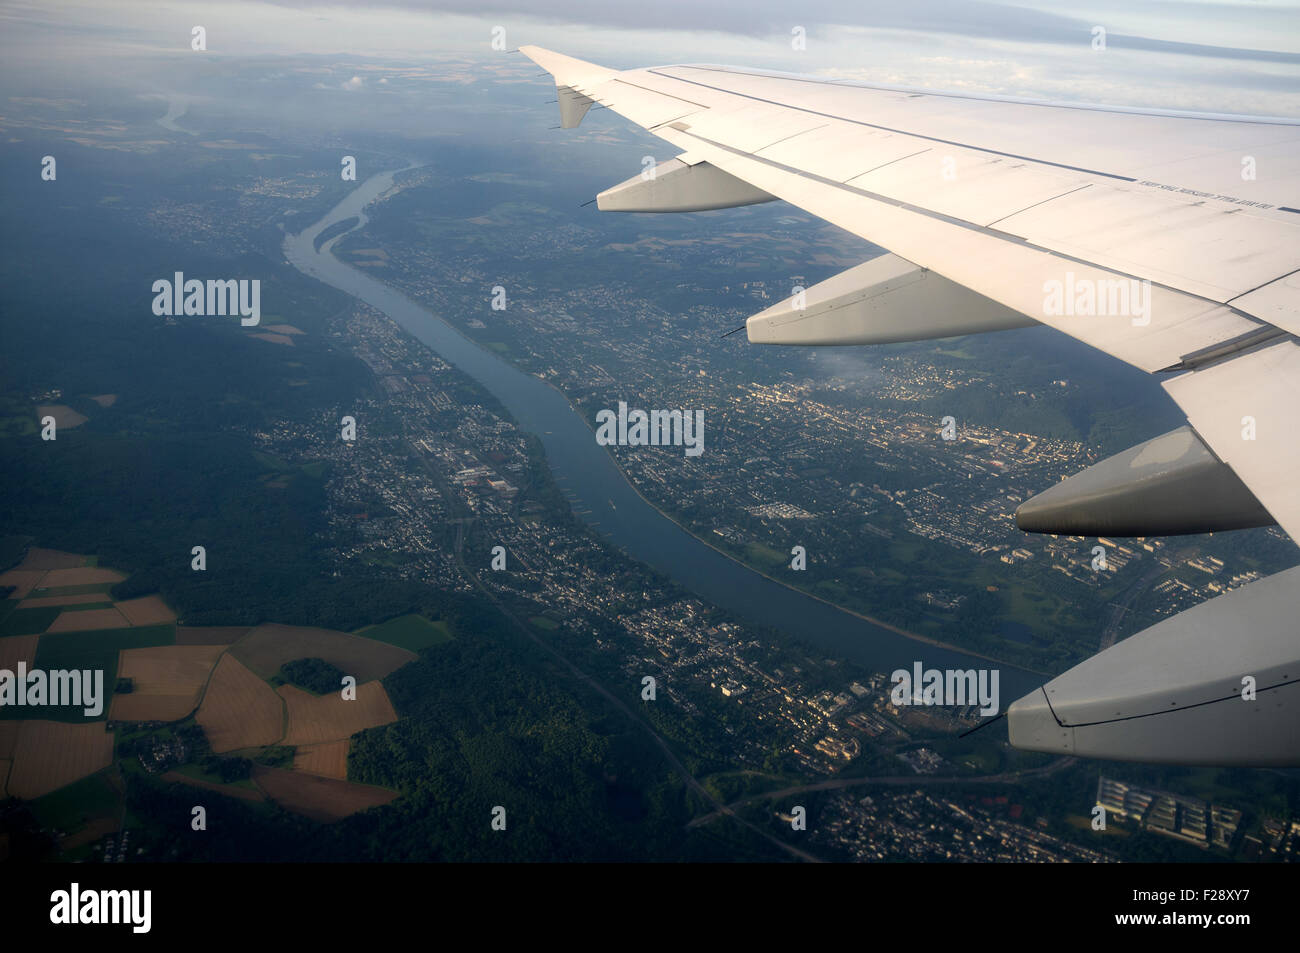 River Rhine Bonn Germany as seen from a Germanwings Airbus A319 commercial airliner after take off from Cologne Germany Stock Photo